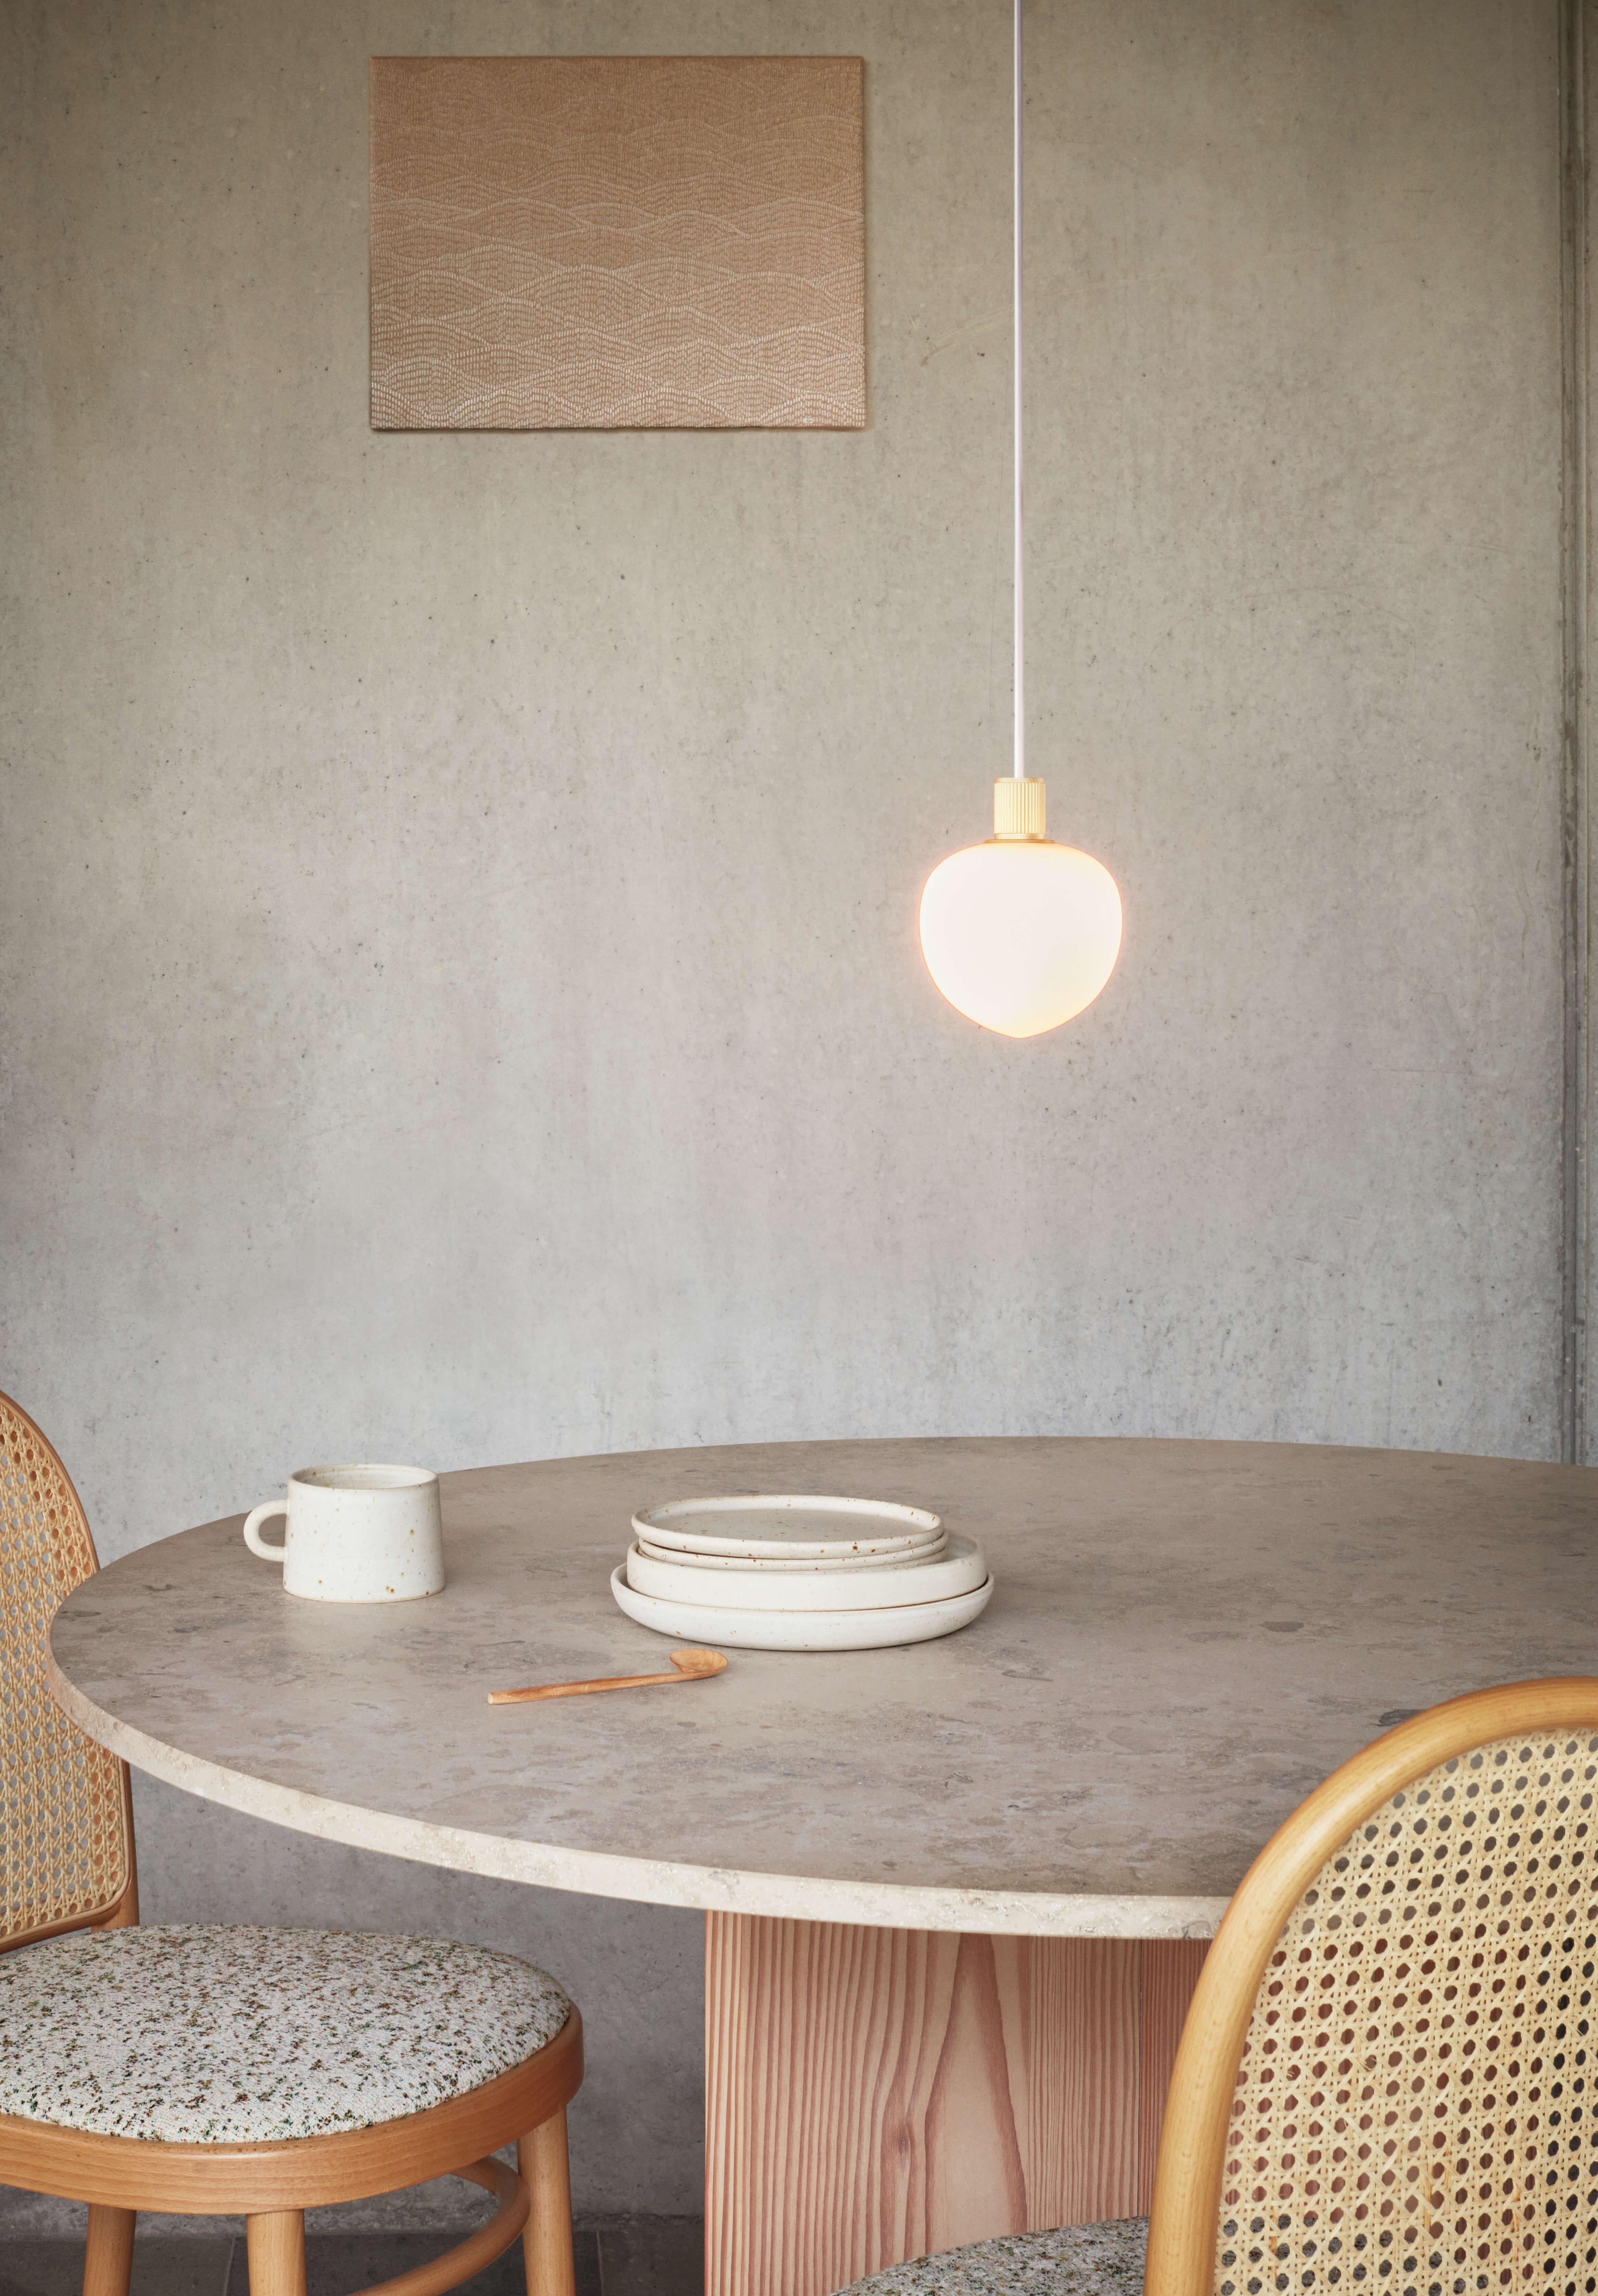 Memoir 120 Pendant Lamp signed by GamFratesi for LYFA.

DIMENSIONS
W 30 x D 12 x H 14.4 cm

COLOURS
Black or brass

Textile wire (white) 600cm
Socket: G9
Max wattage: 28 Watt
Energy class: The luminaire is compatible with bulbs of energy classes A++